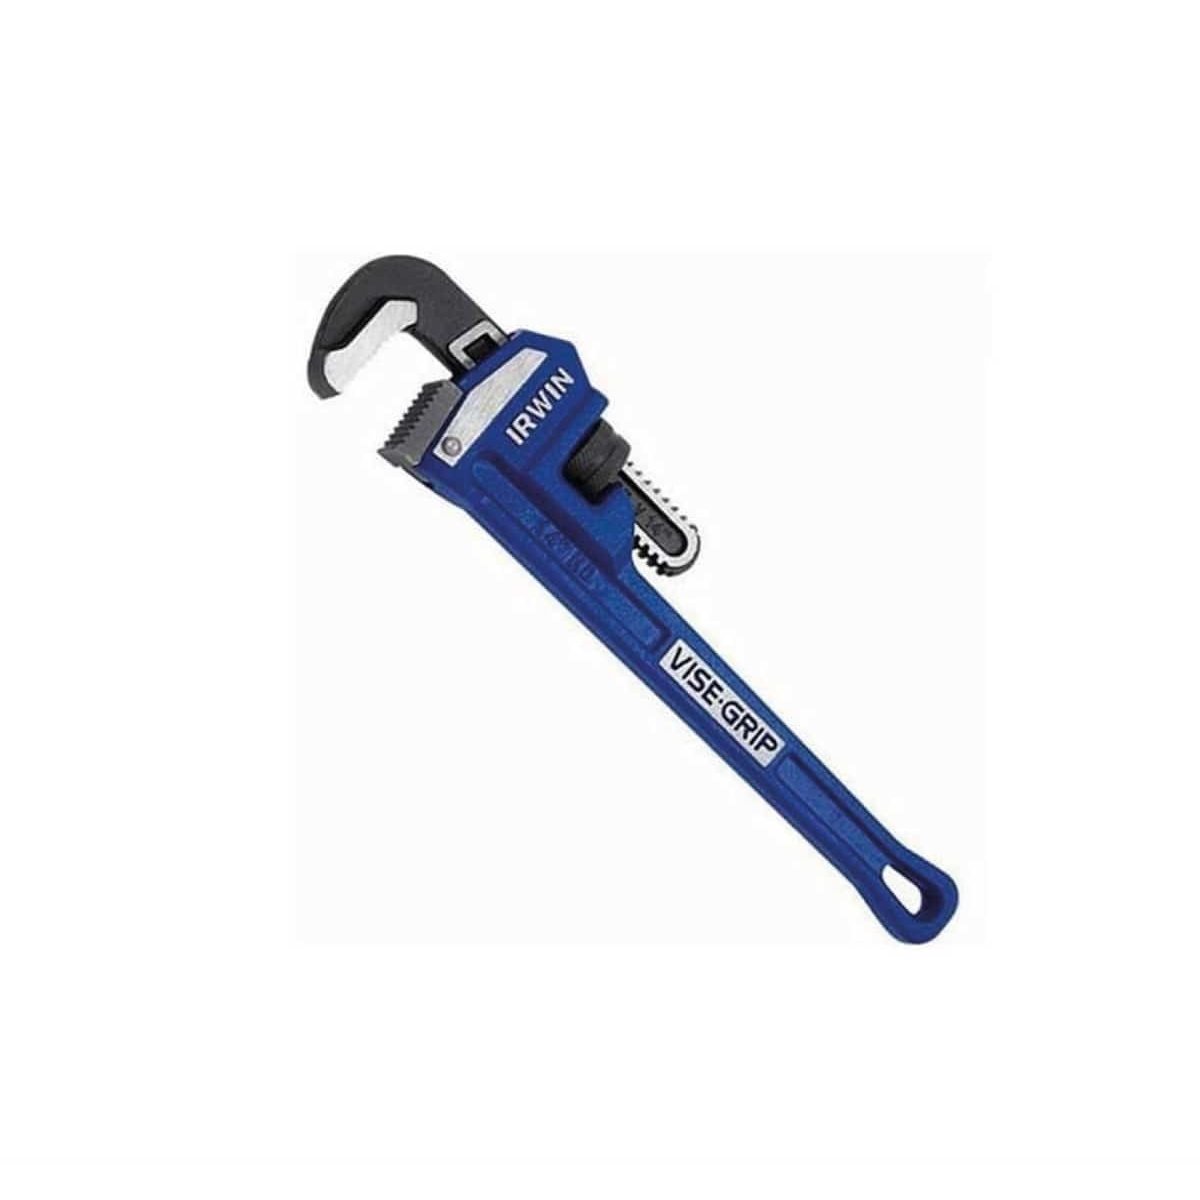 Buy Wadfow 24" Pipe Wrench (WPW1124) in Accra, Ghana | Supply Master Vices & Clamps Buy Tools hardware Building materials